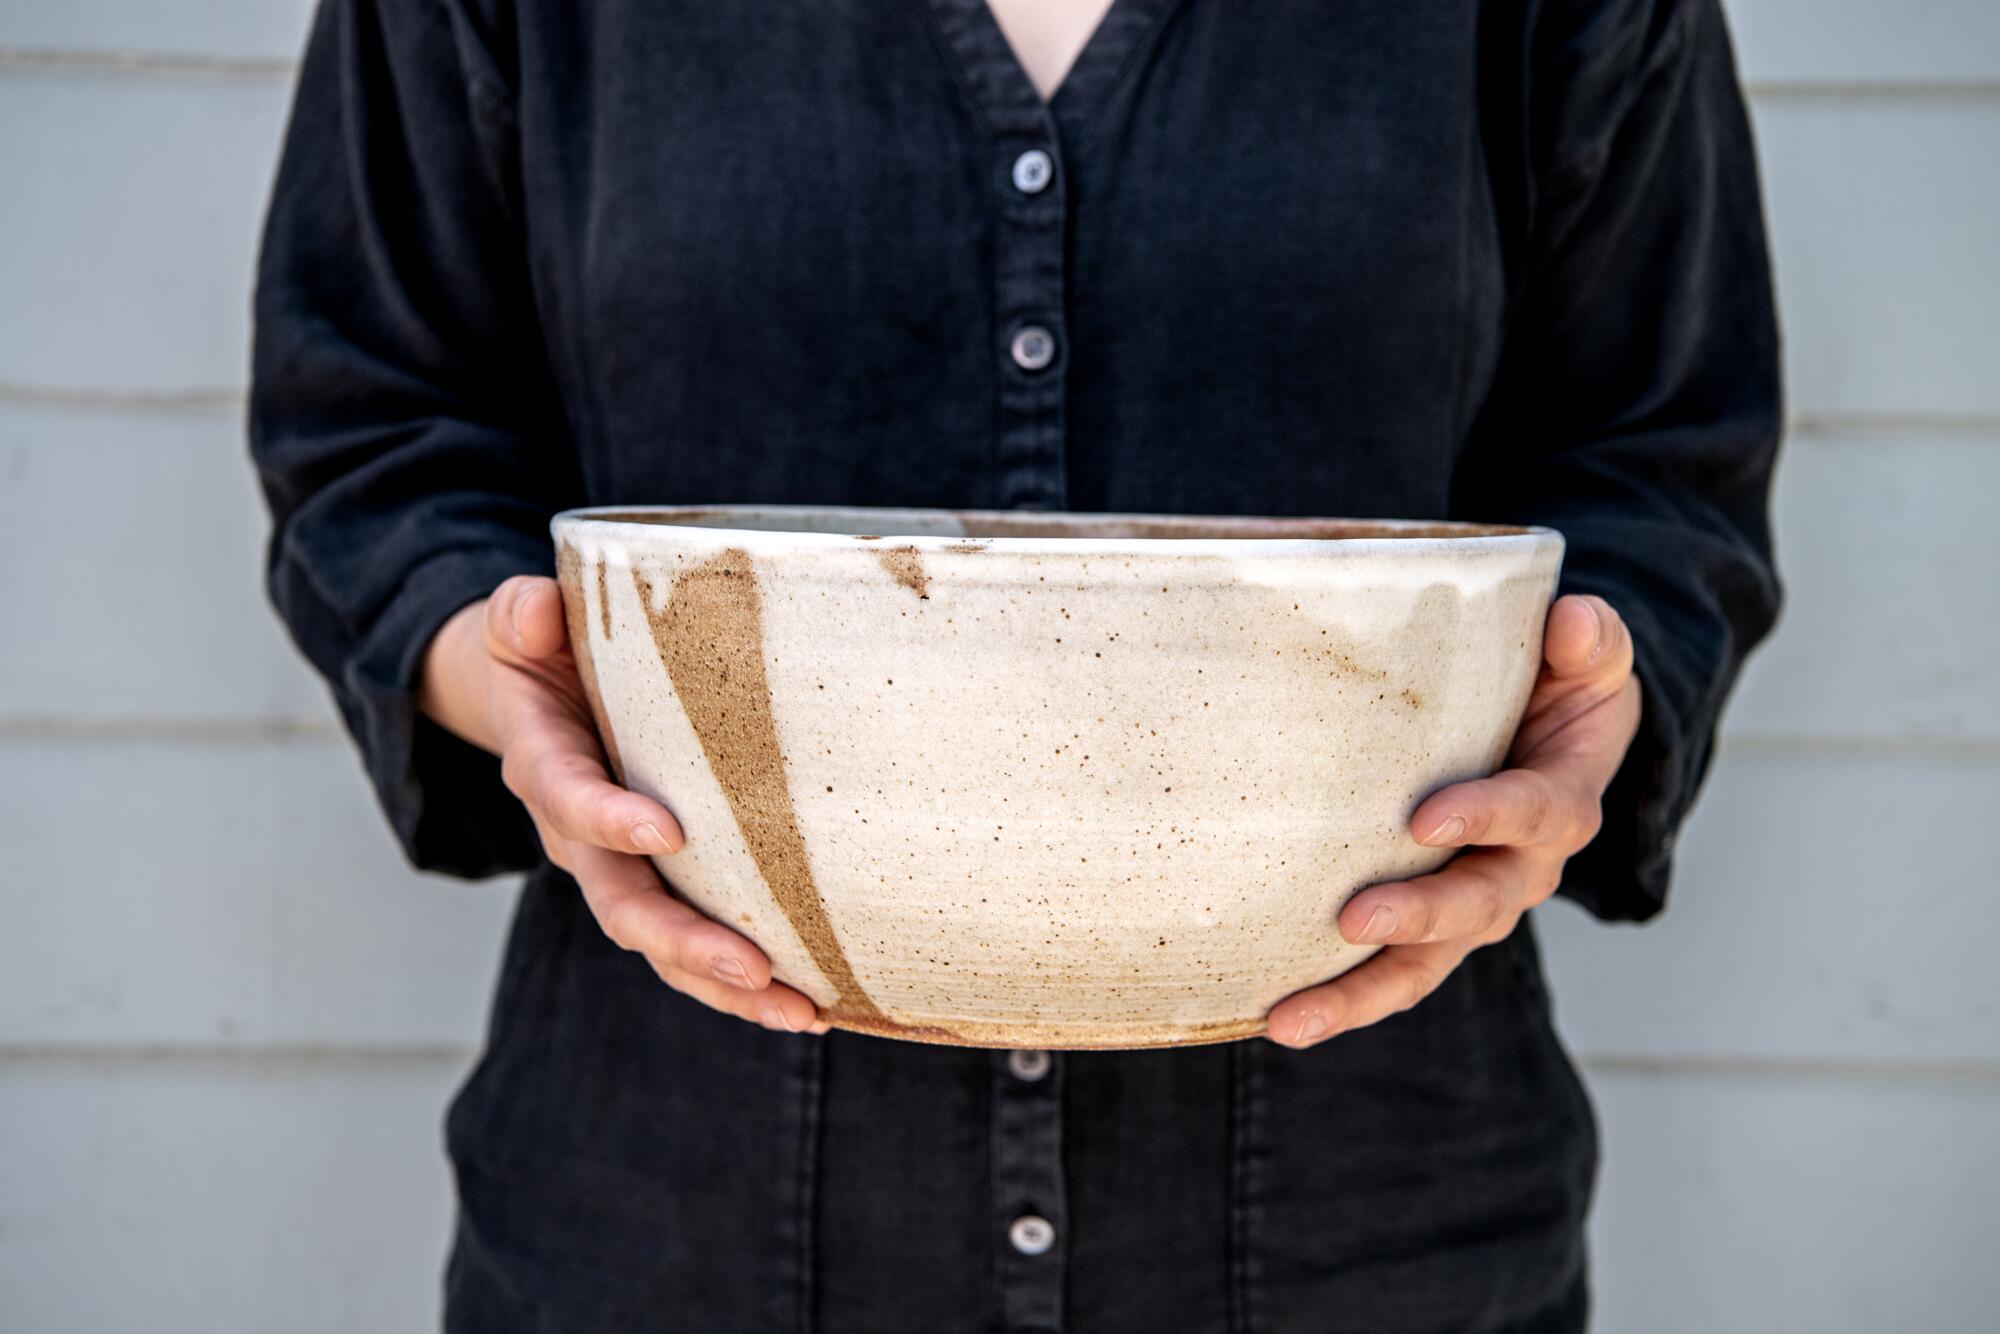 A close-up on the hands of a woman standing holding a large clay bowl.